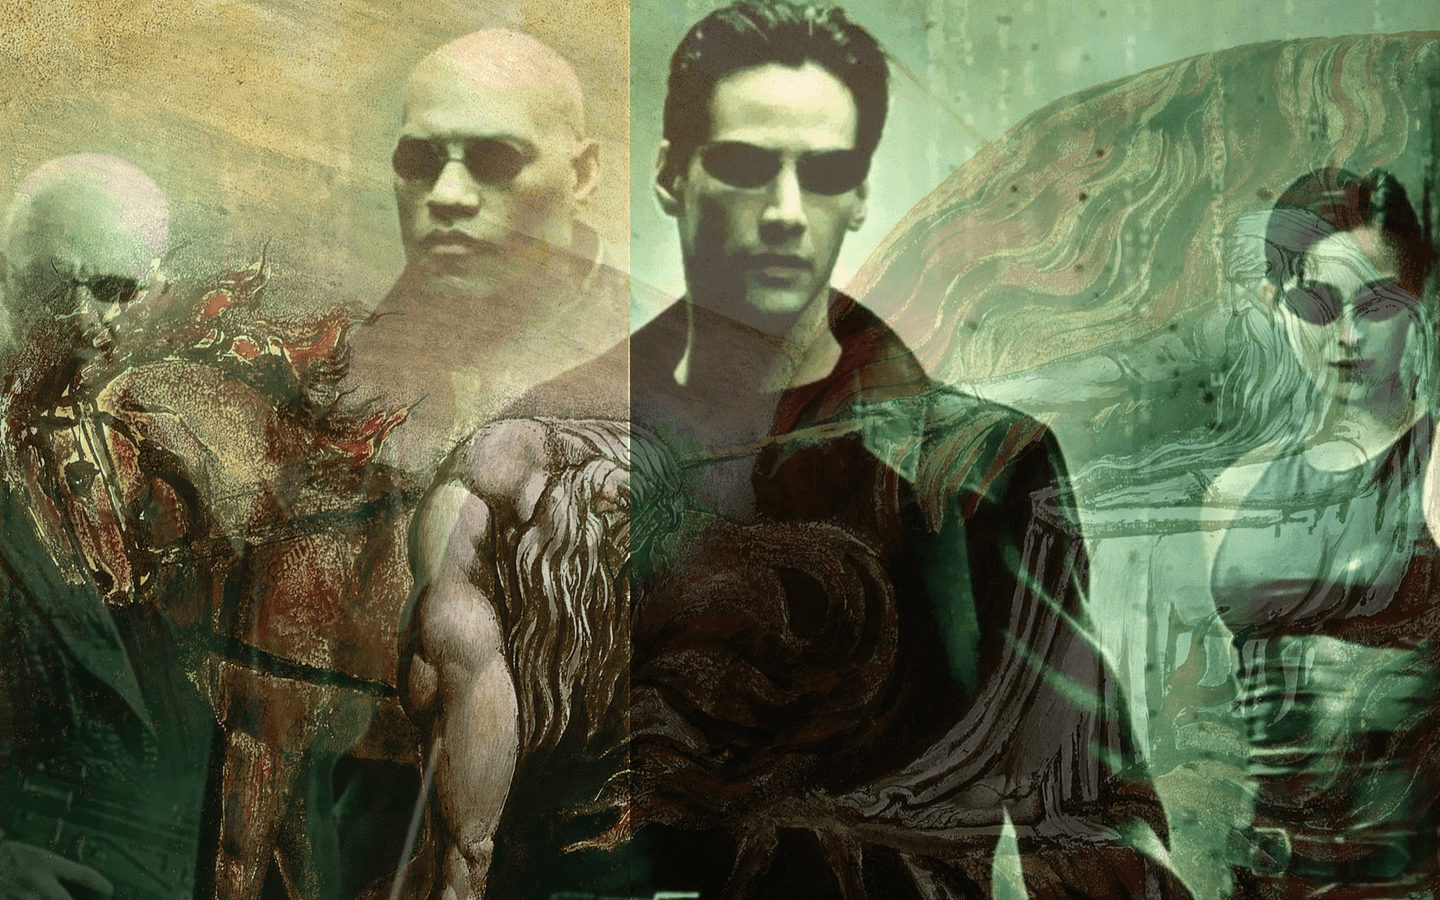 Religious and Theological Themes in The Matrix